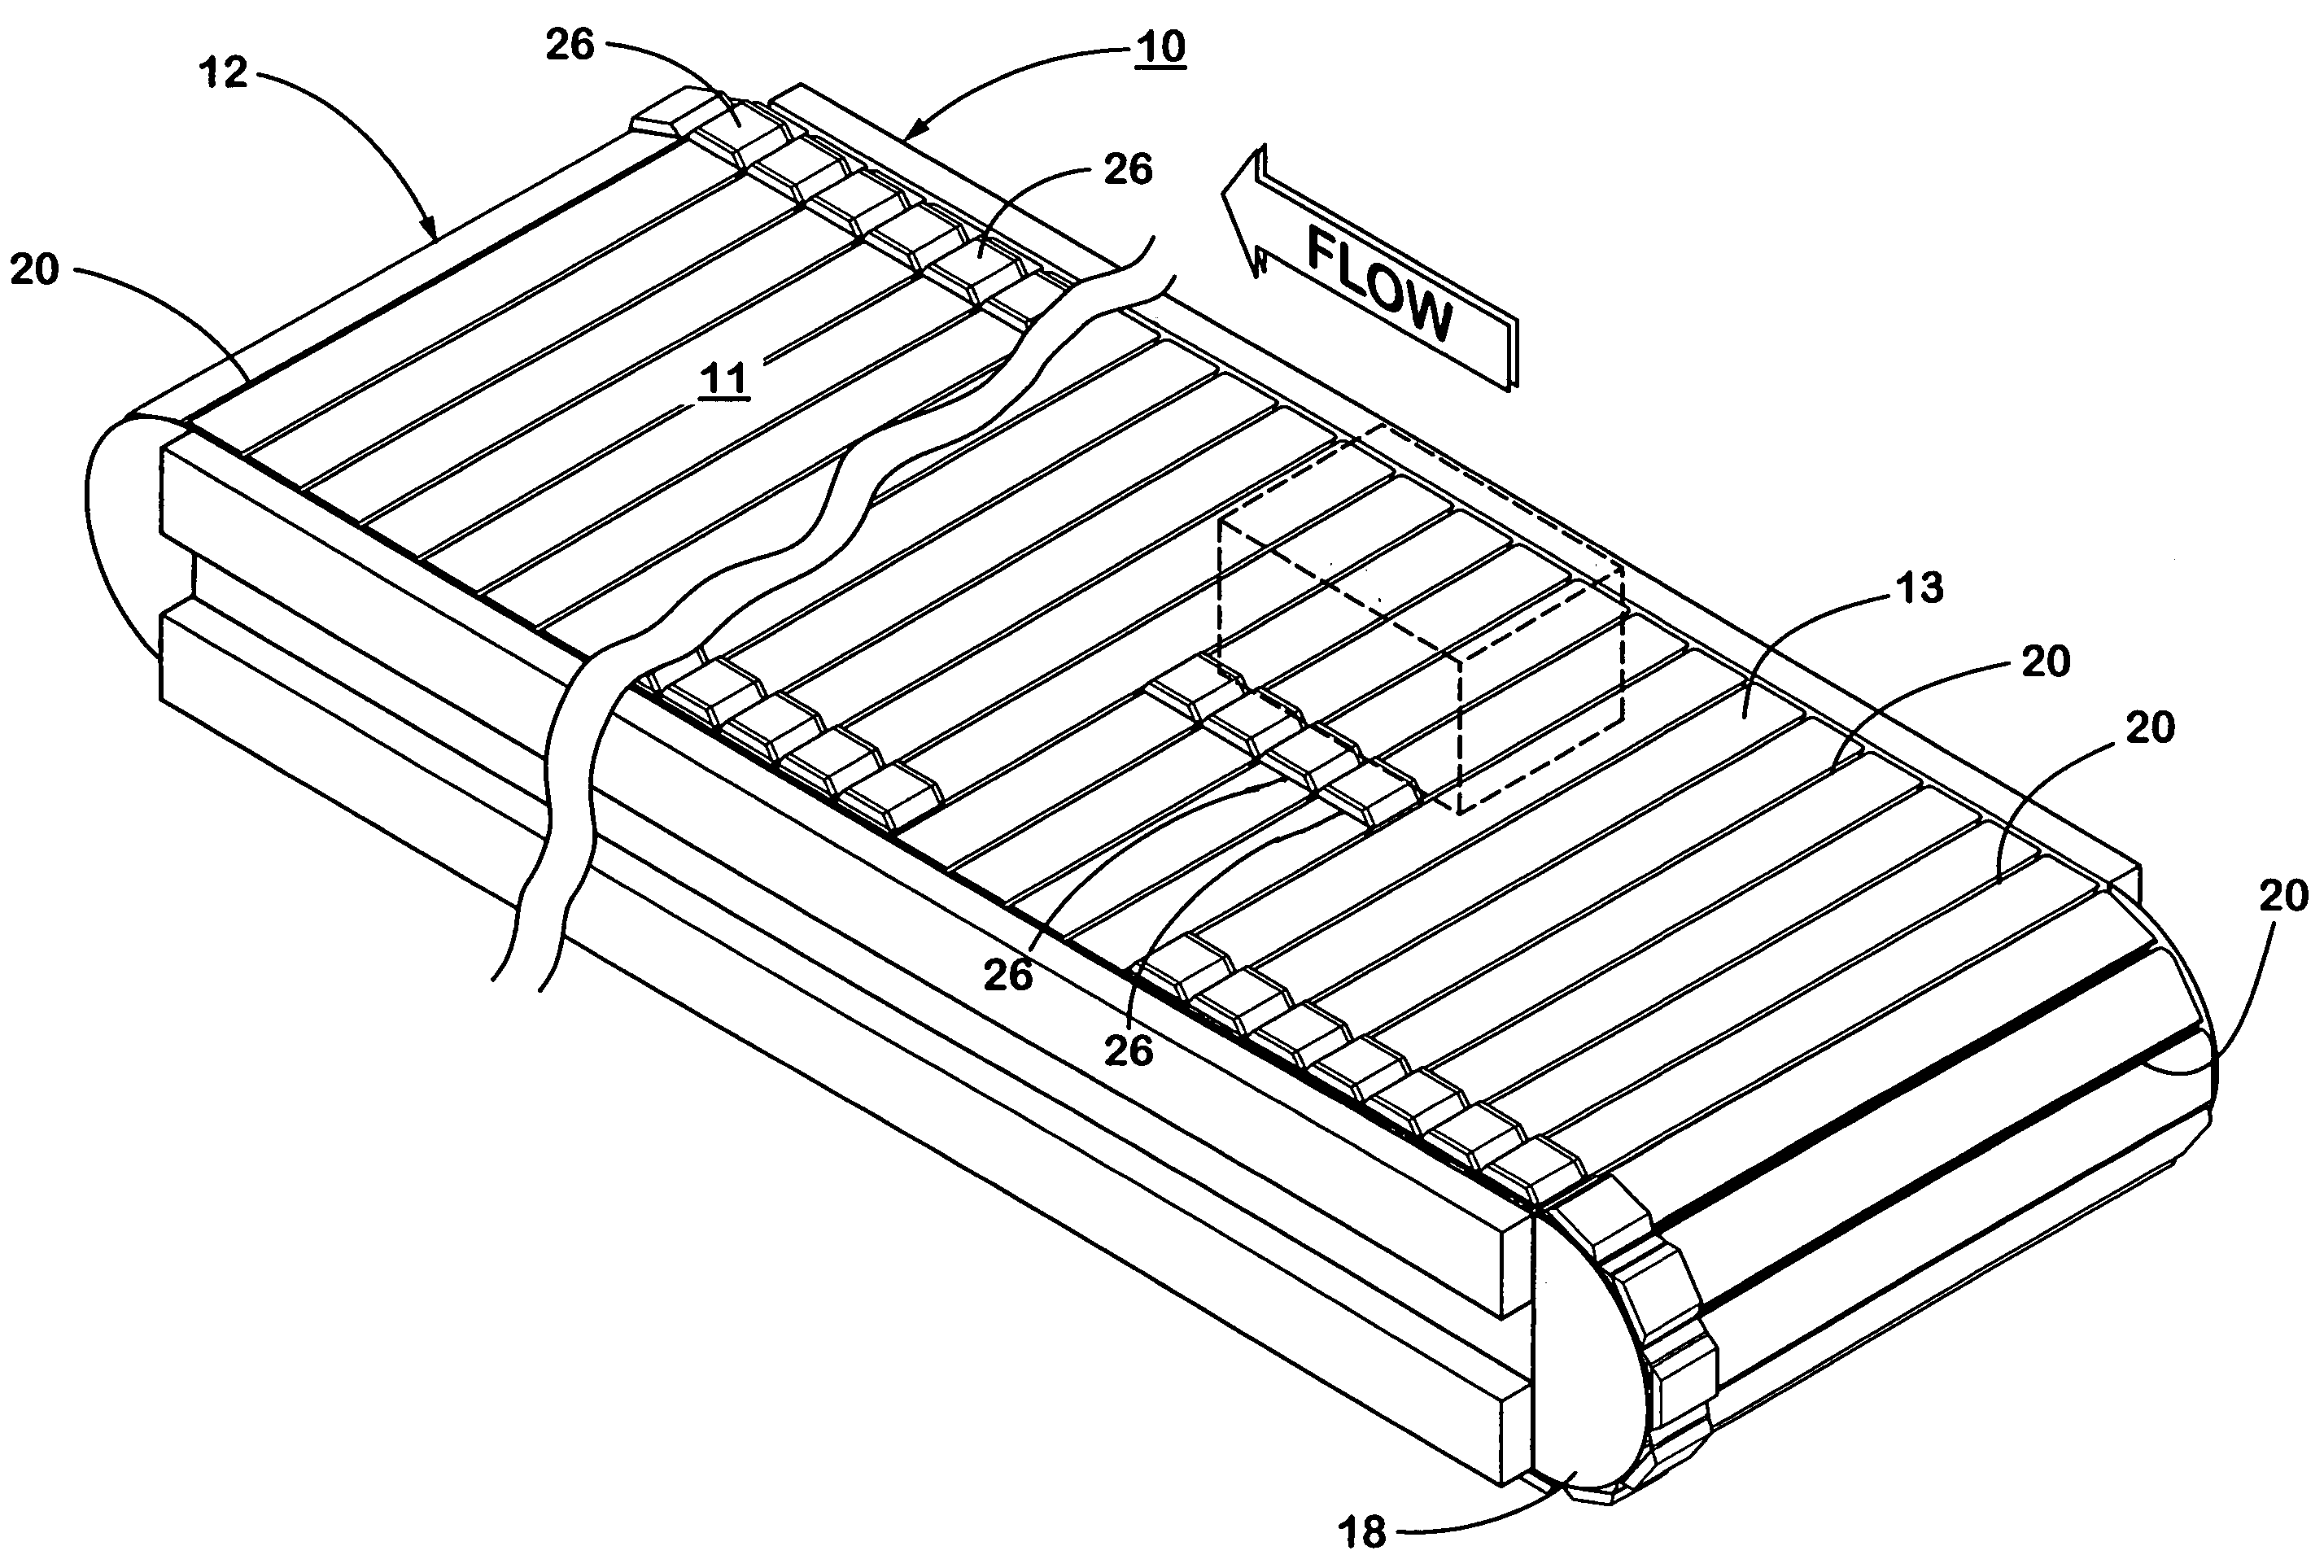 Positive displacement shoe and slat sorter apparatus and method